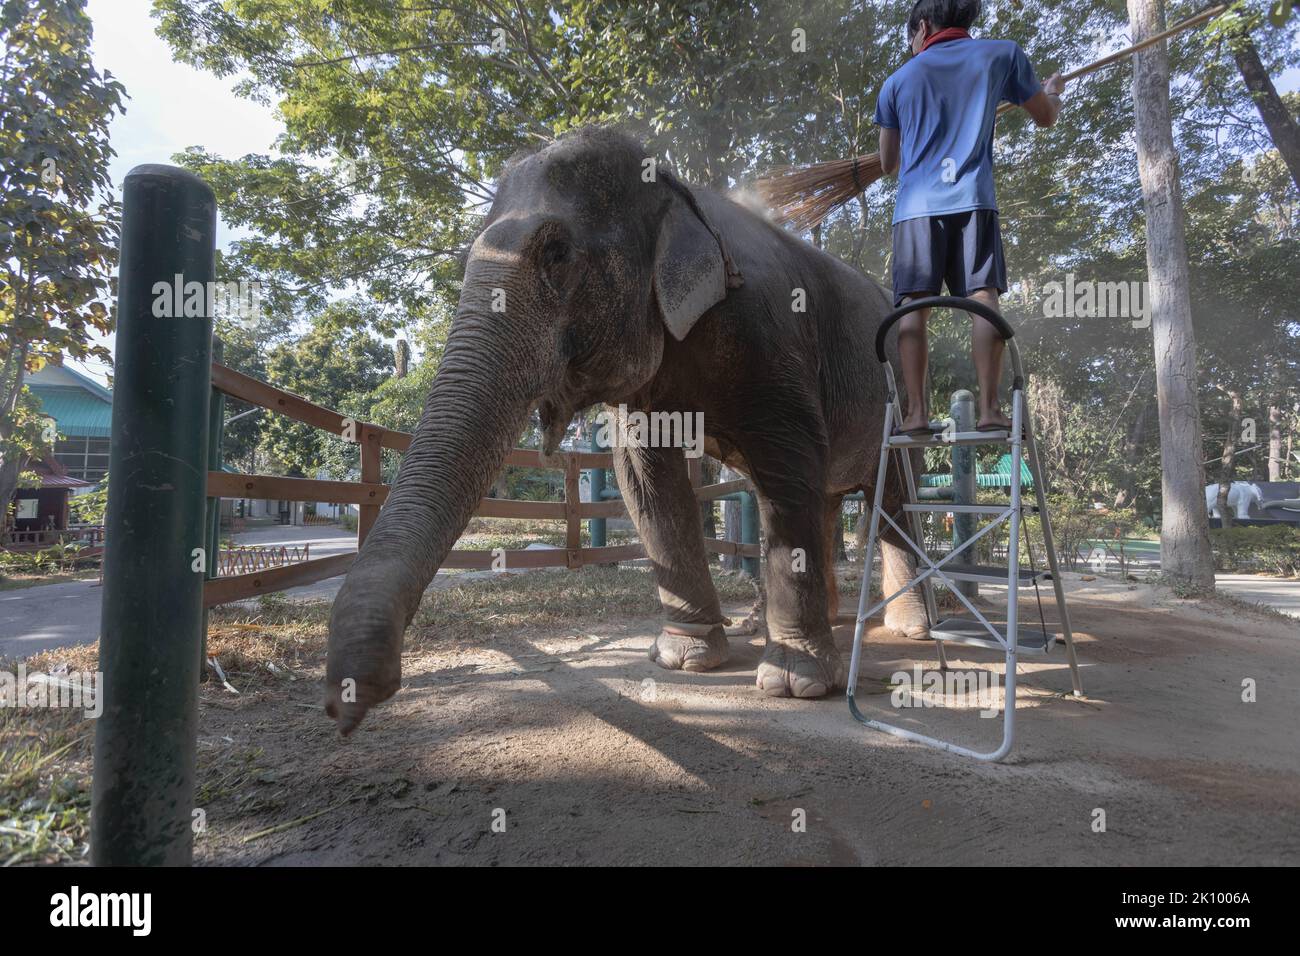 Elephant keeper cleans elephant Chand Nuan at the Friends of the Asian Elephant hospital. The Friends of the Asian Elephant hospital, in northern Thailand, is the first elephant hospital in the world. Since 1993 it has treated elephants with ailments ranging from eye infections to landmine injuries. Stock Photo